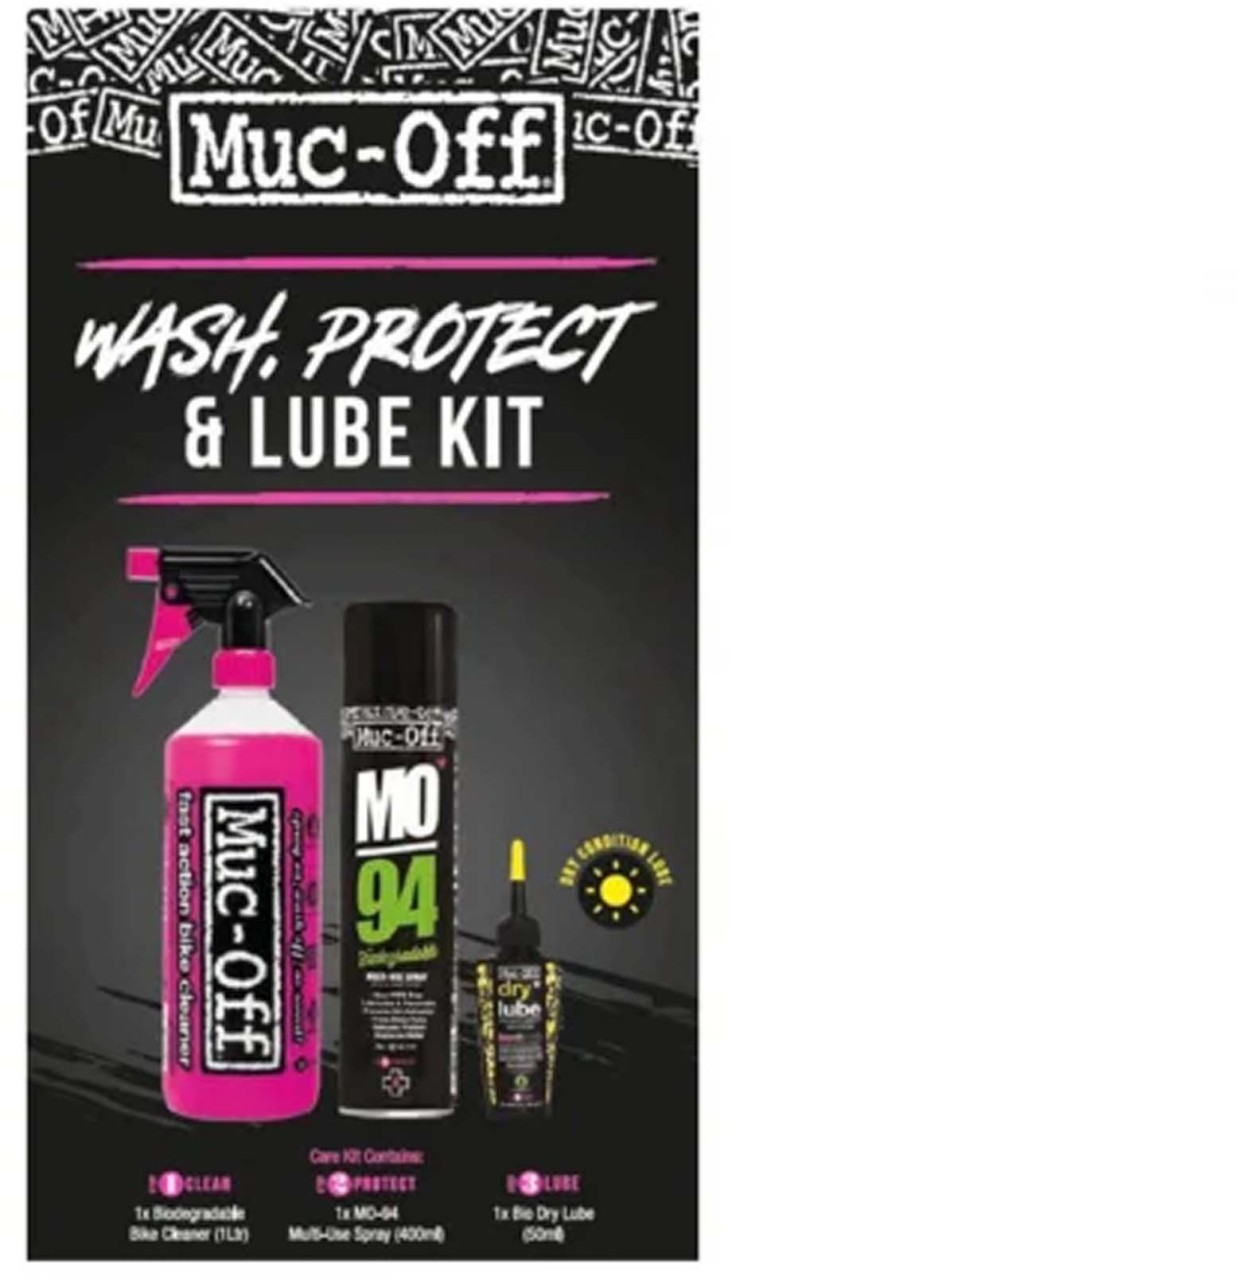 Muc-Off Wash, Protect, Lube Kit (Dry Lube Version) black nos